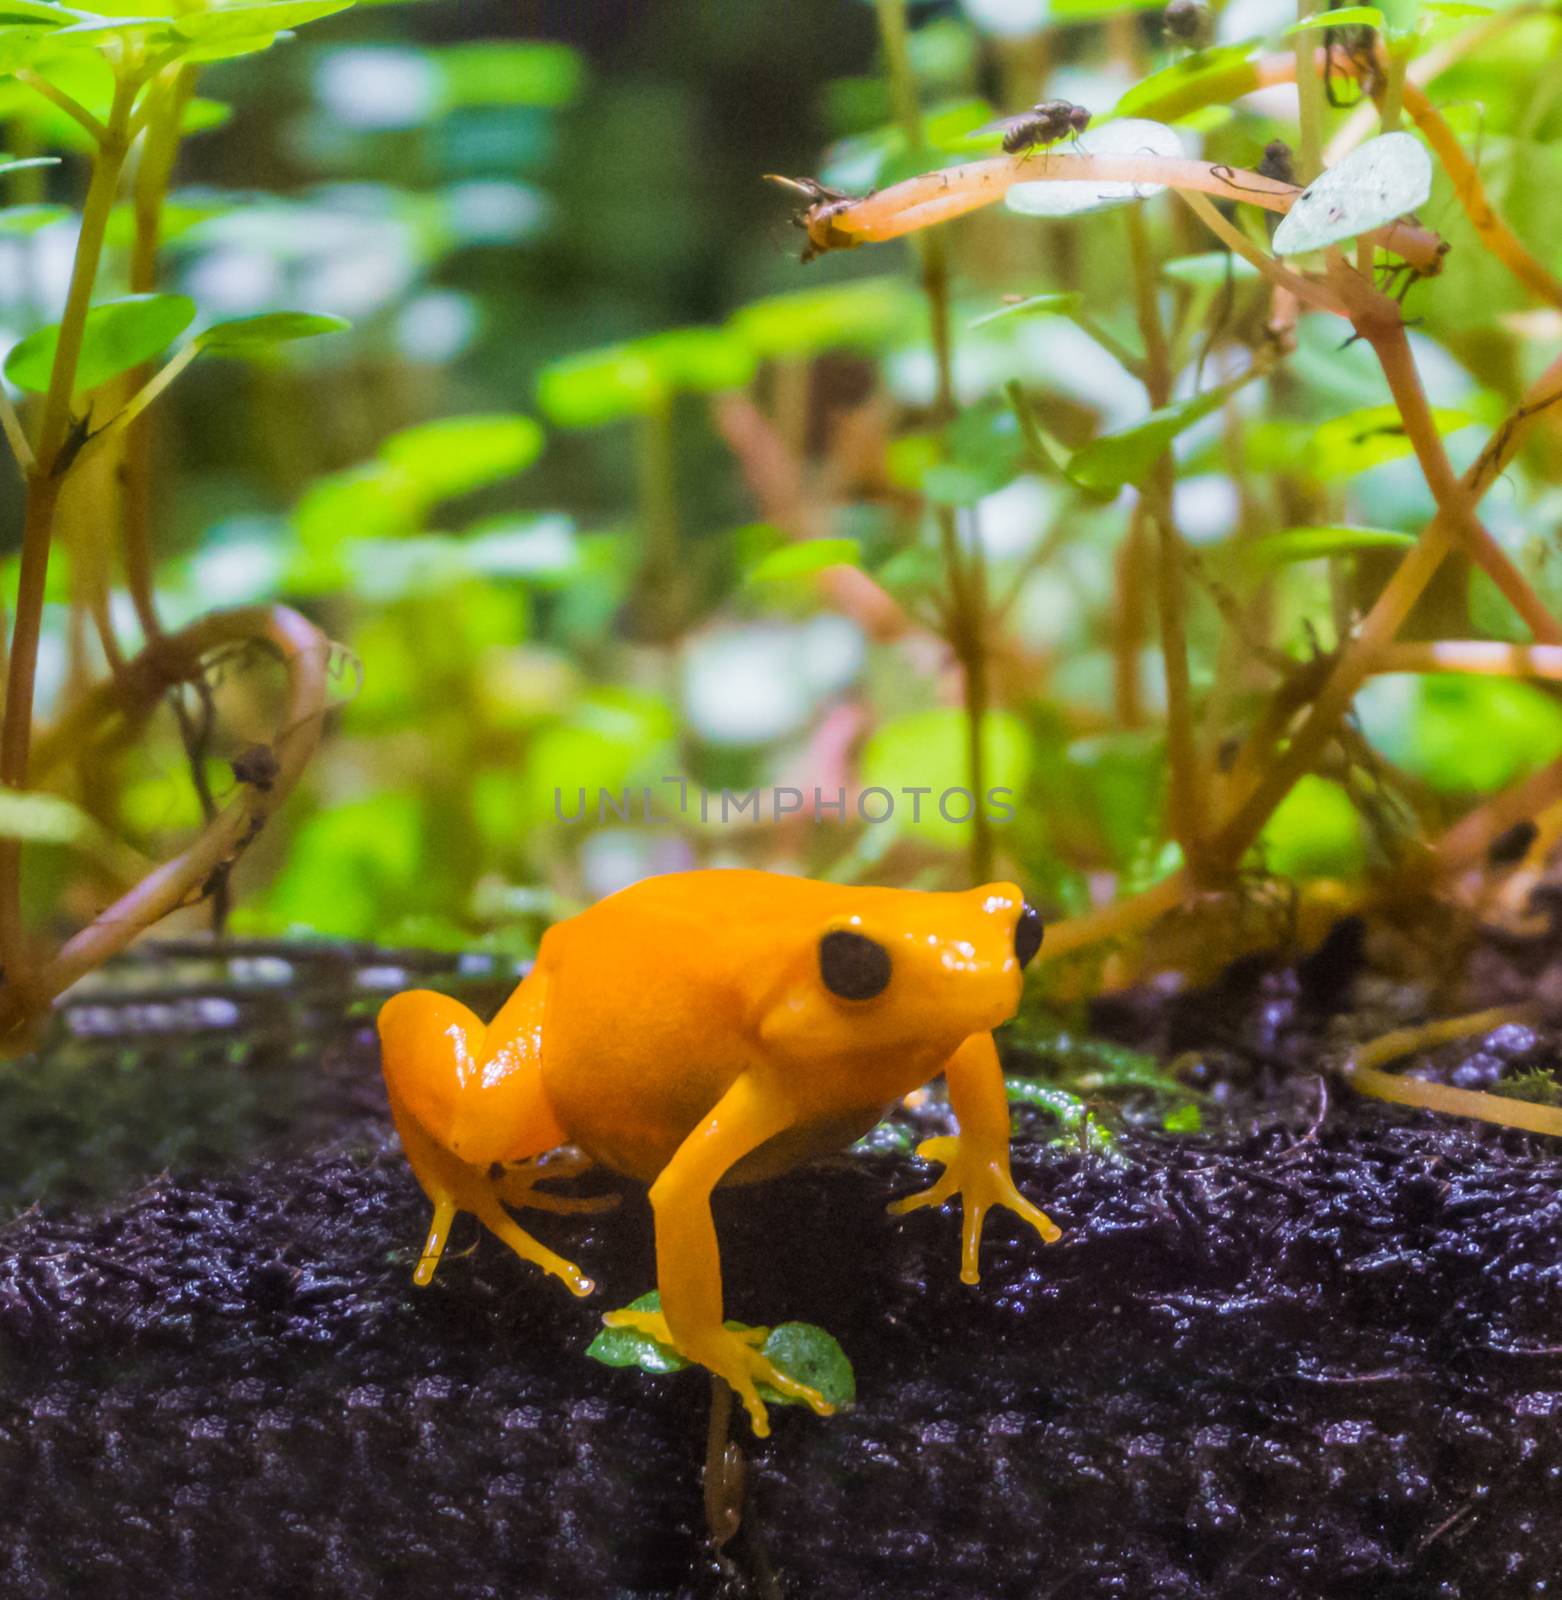 yellow poison dart frog a dangerous small poisonous frog from america macro closeup